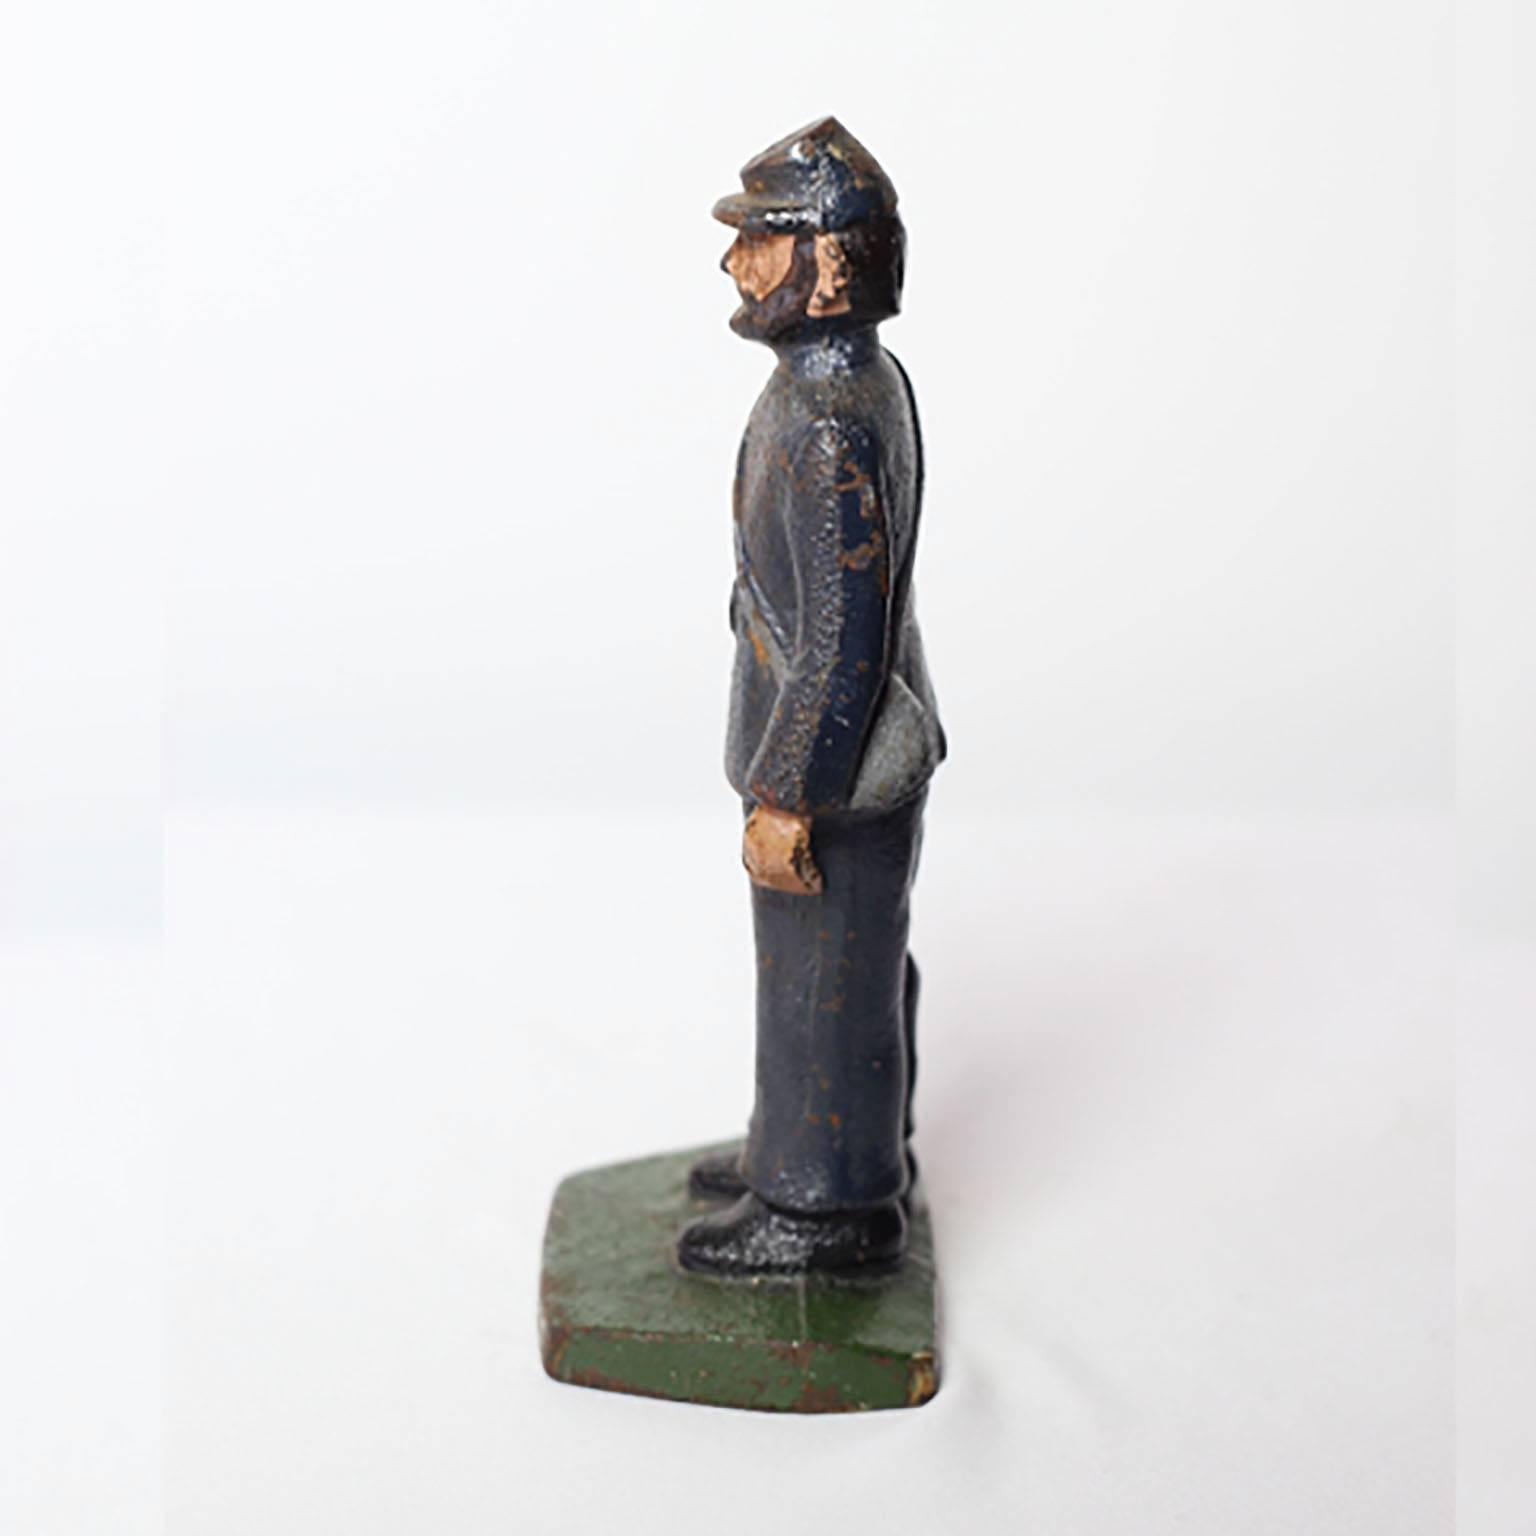 Cast iron confederate soldier. Possible a bookend or a doorstop.